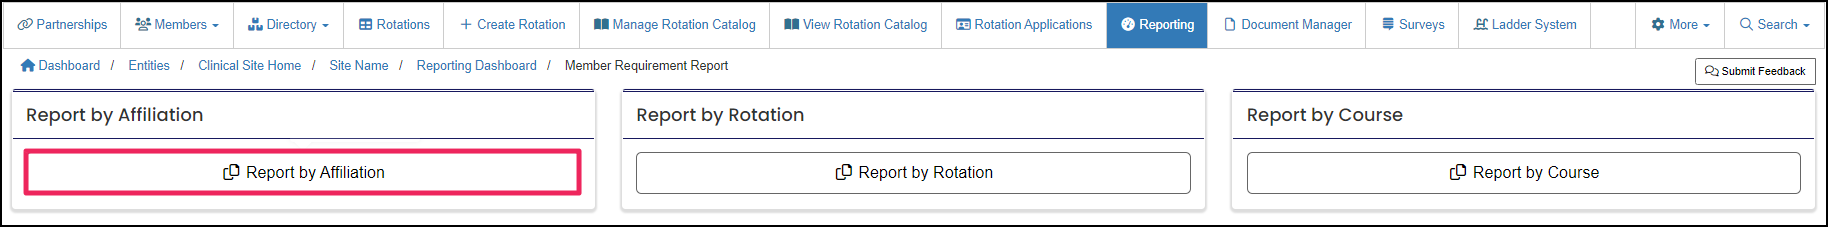 report filters highlighting Report by Affiliation button